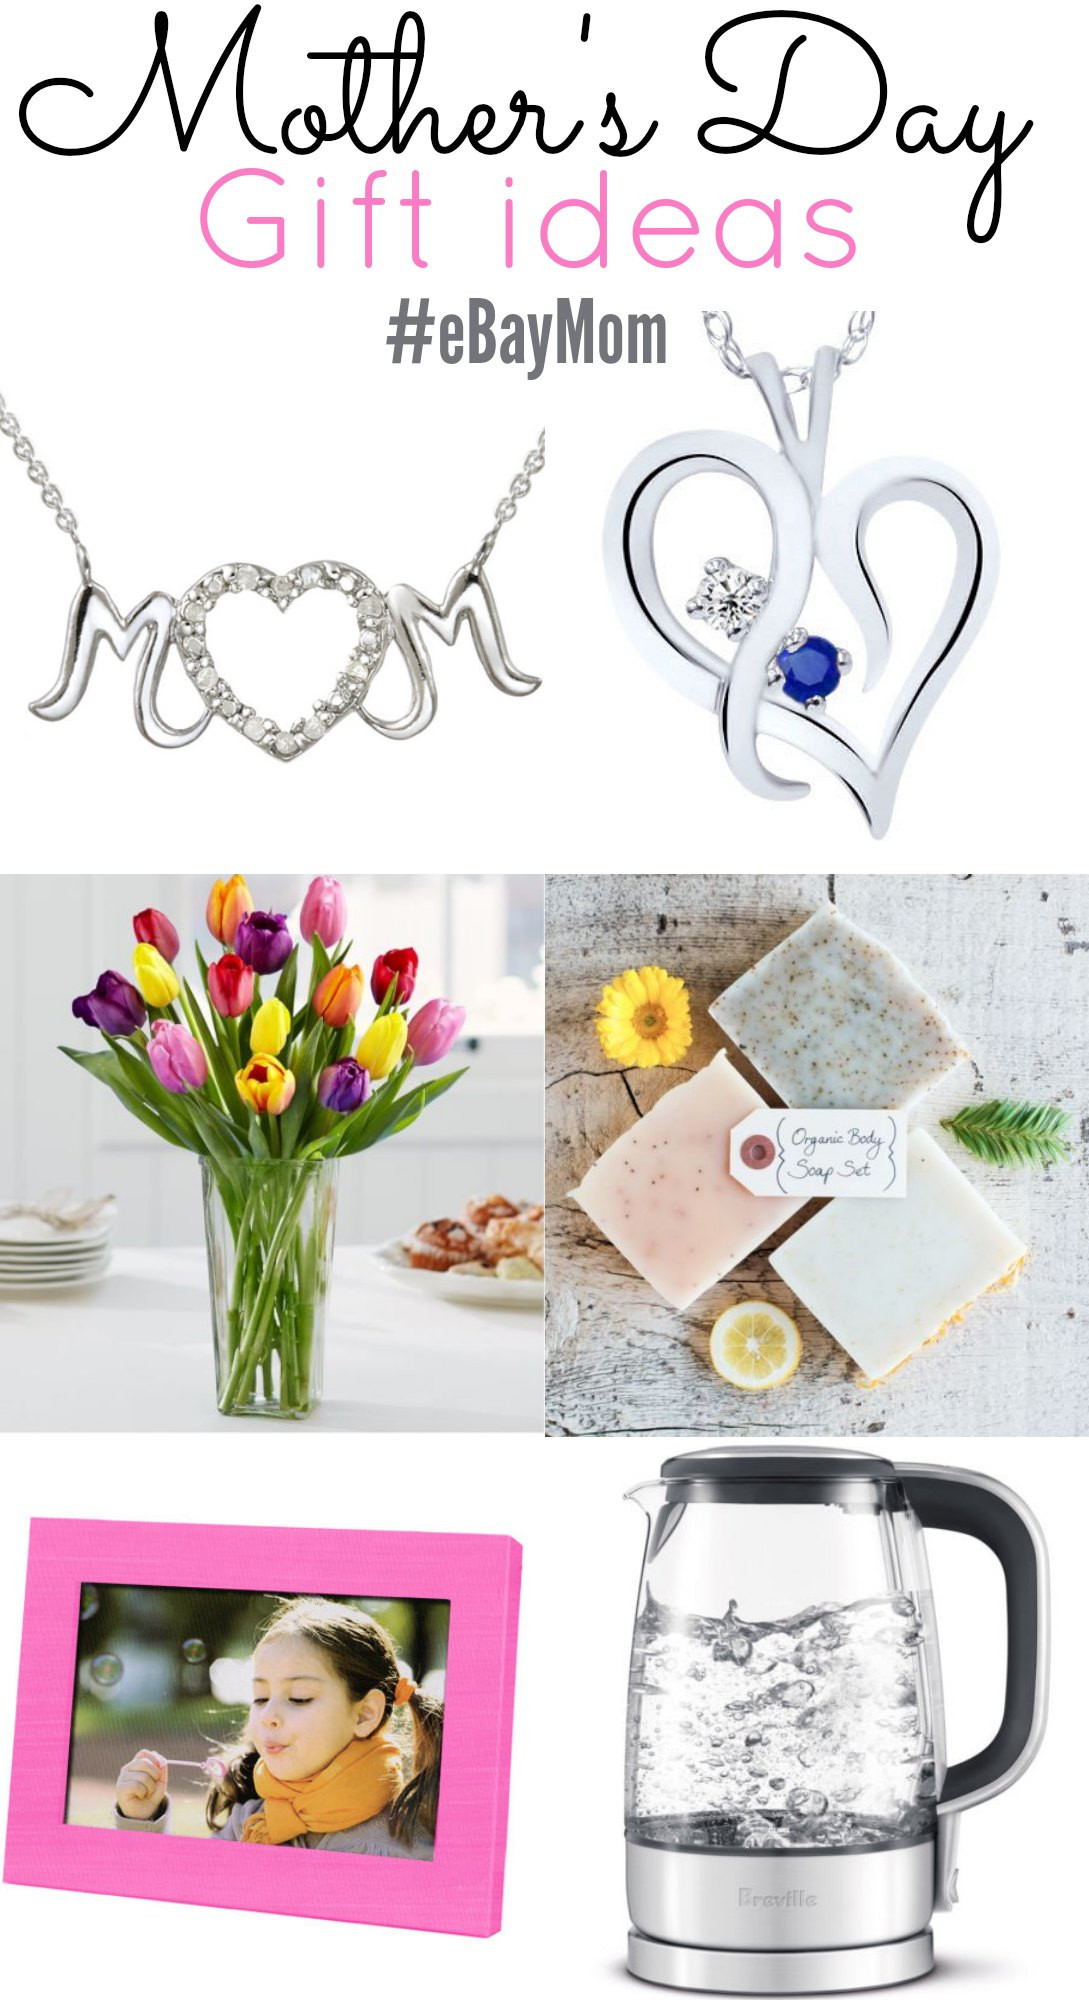 Best ideas about Mothers Day Gift Ideas
. Save or Pin Mother’s Day Gift Ideas & Sweepstakes eBayMom ad Now.